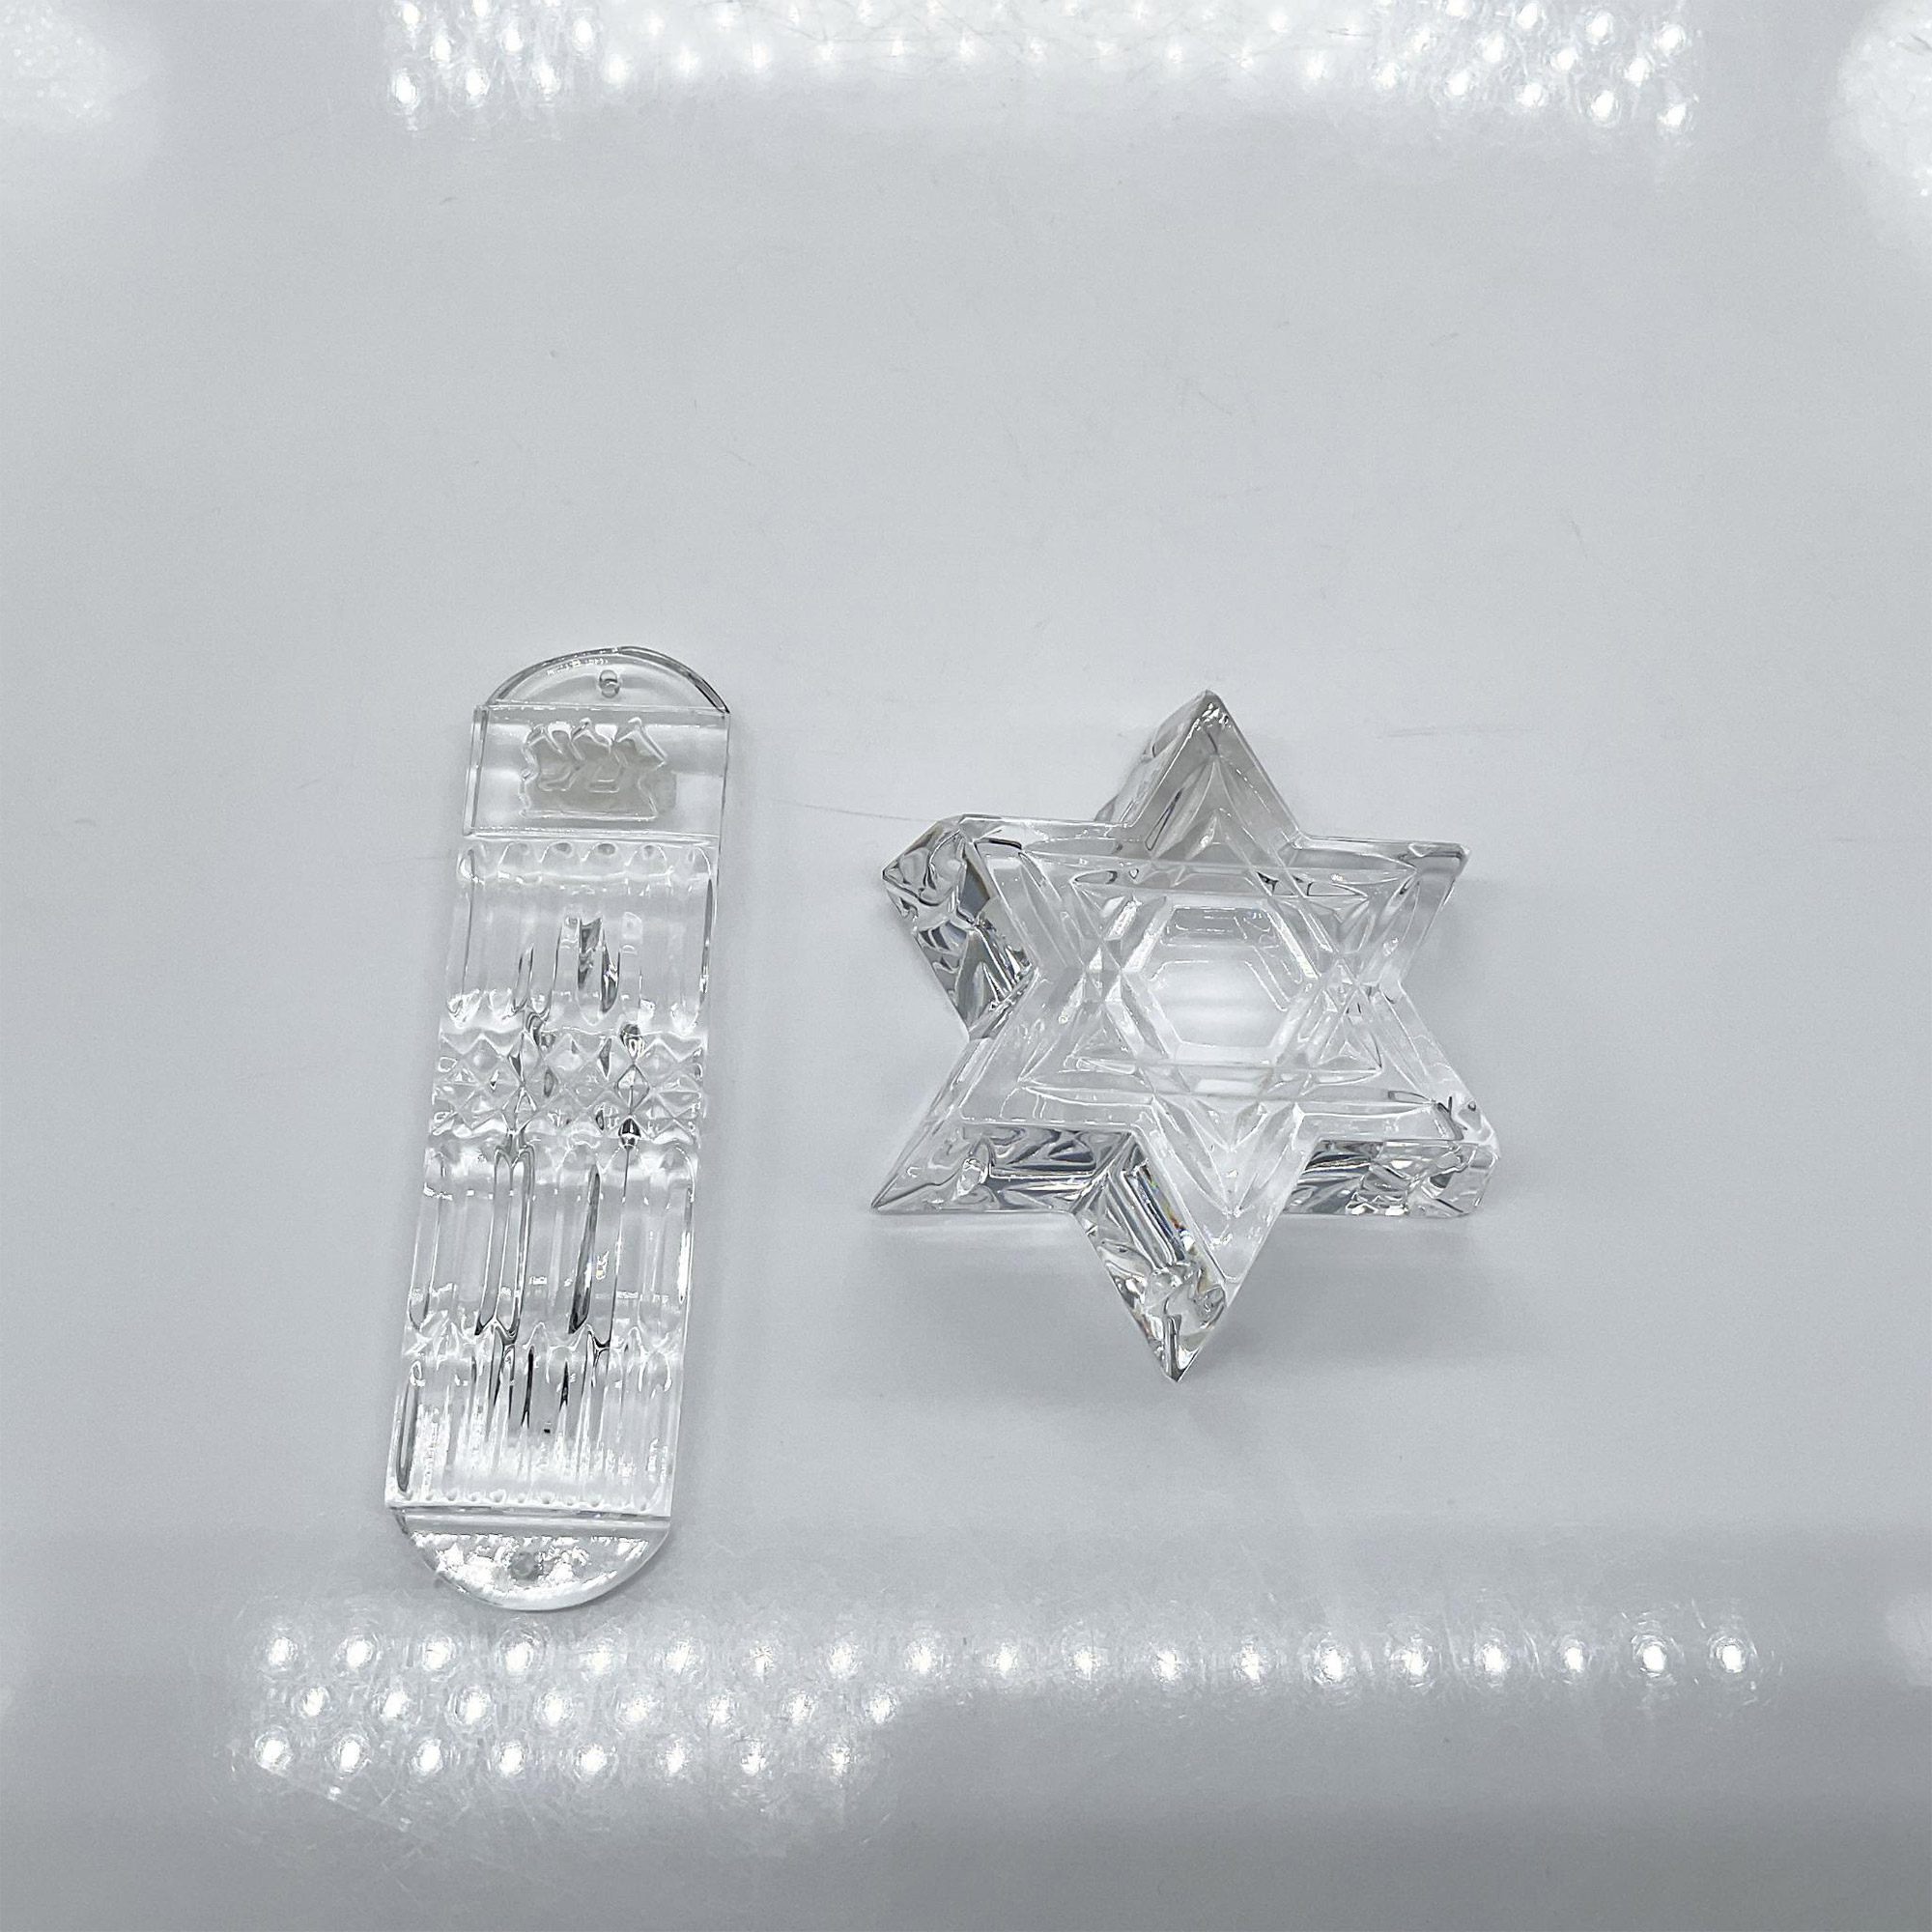 2pc Waterford Mezuzah and Star of David Paperweight - Image 2 of 4